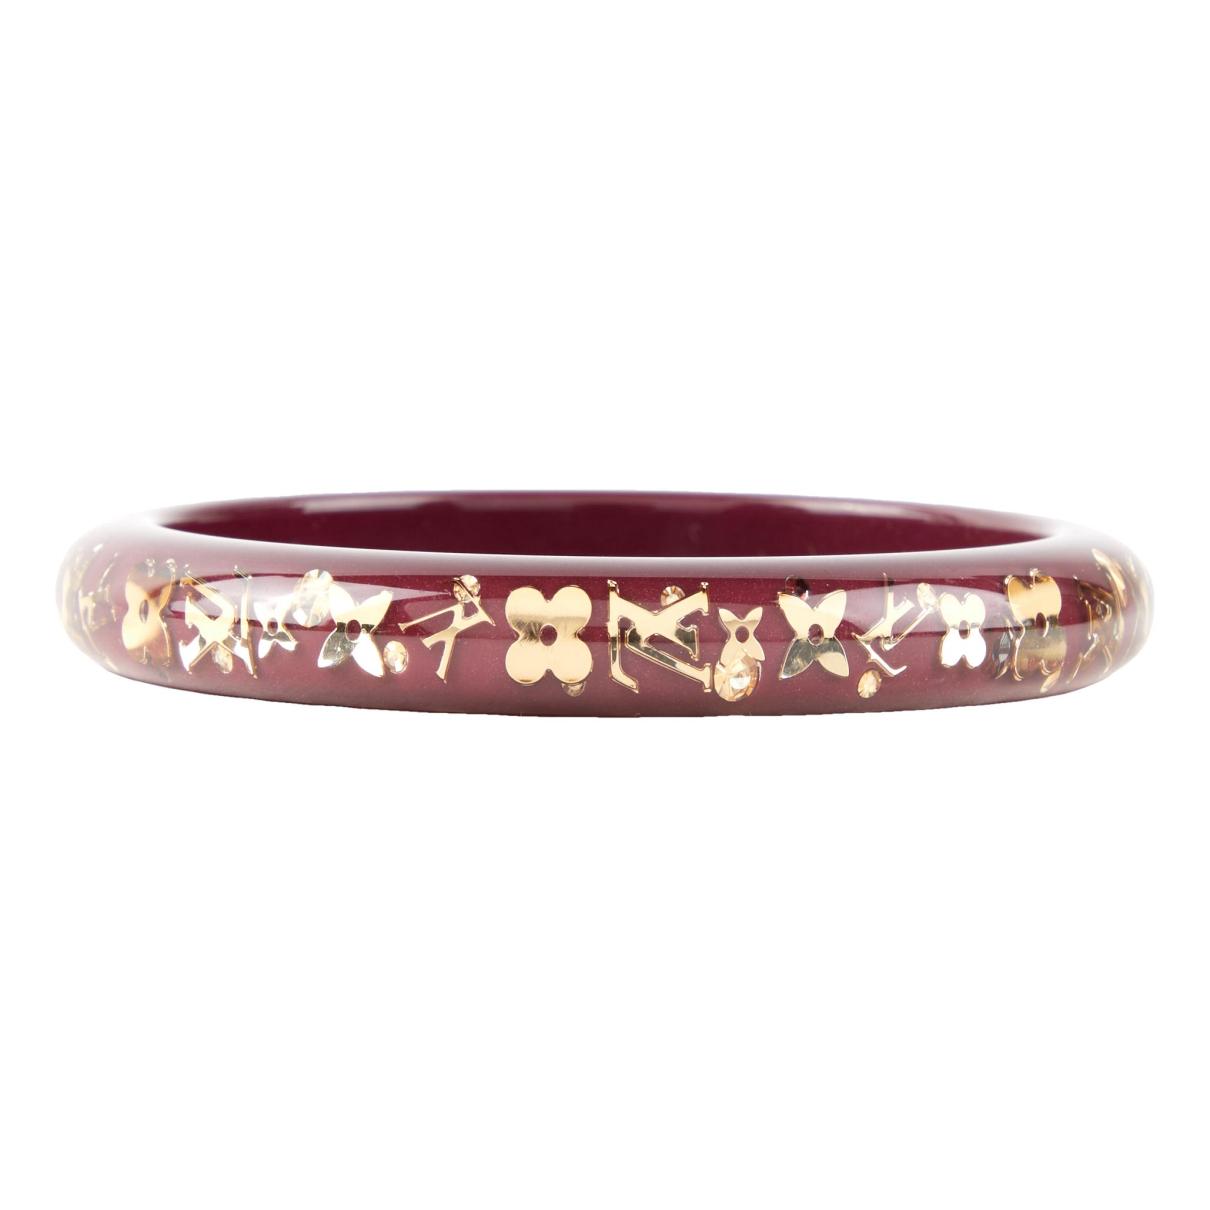 Bracelet Louis Vuitton Red in gold and steel - 33639127